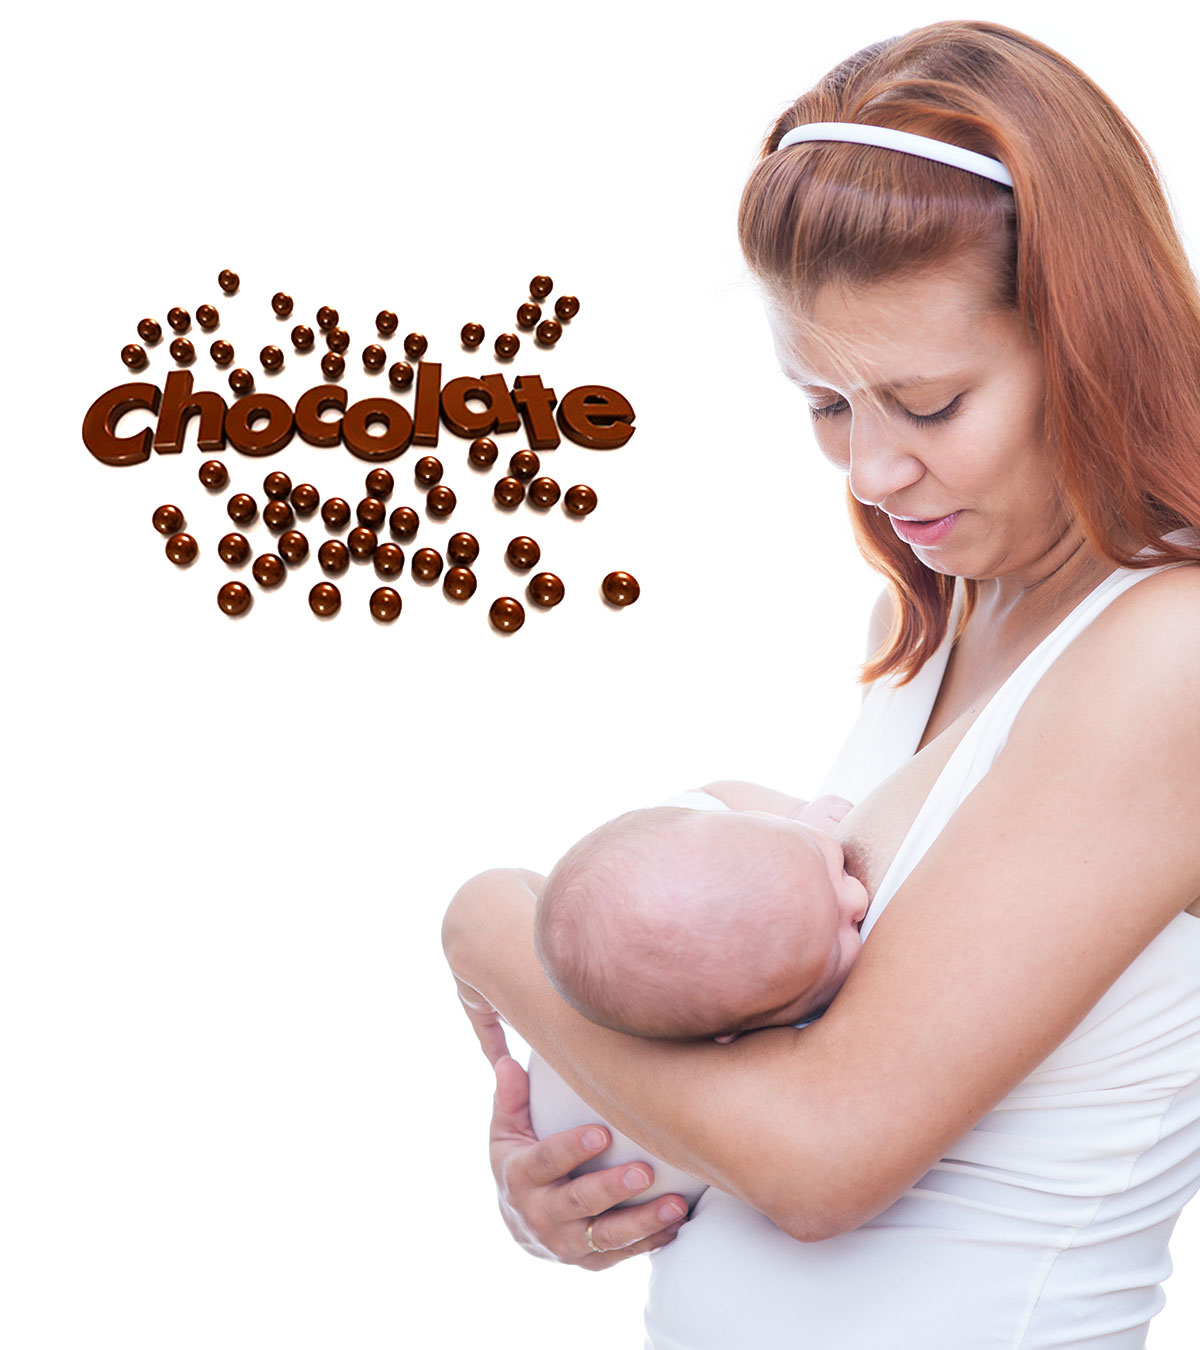 Is-It-Safe-To-Eat-Chocolate-While-Breastfeeding1-1.jpg